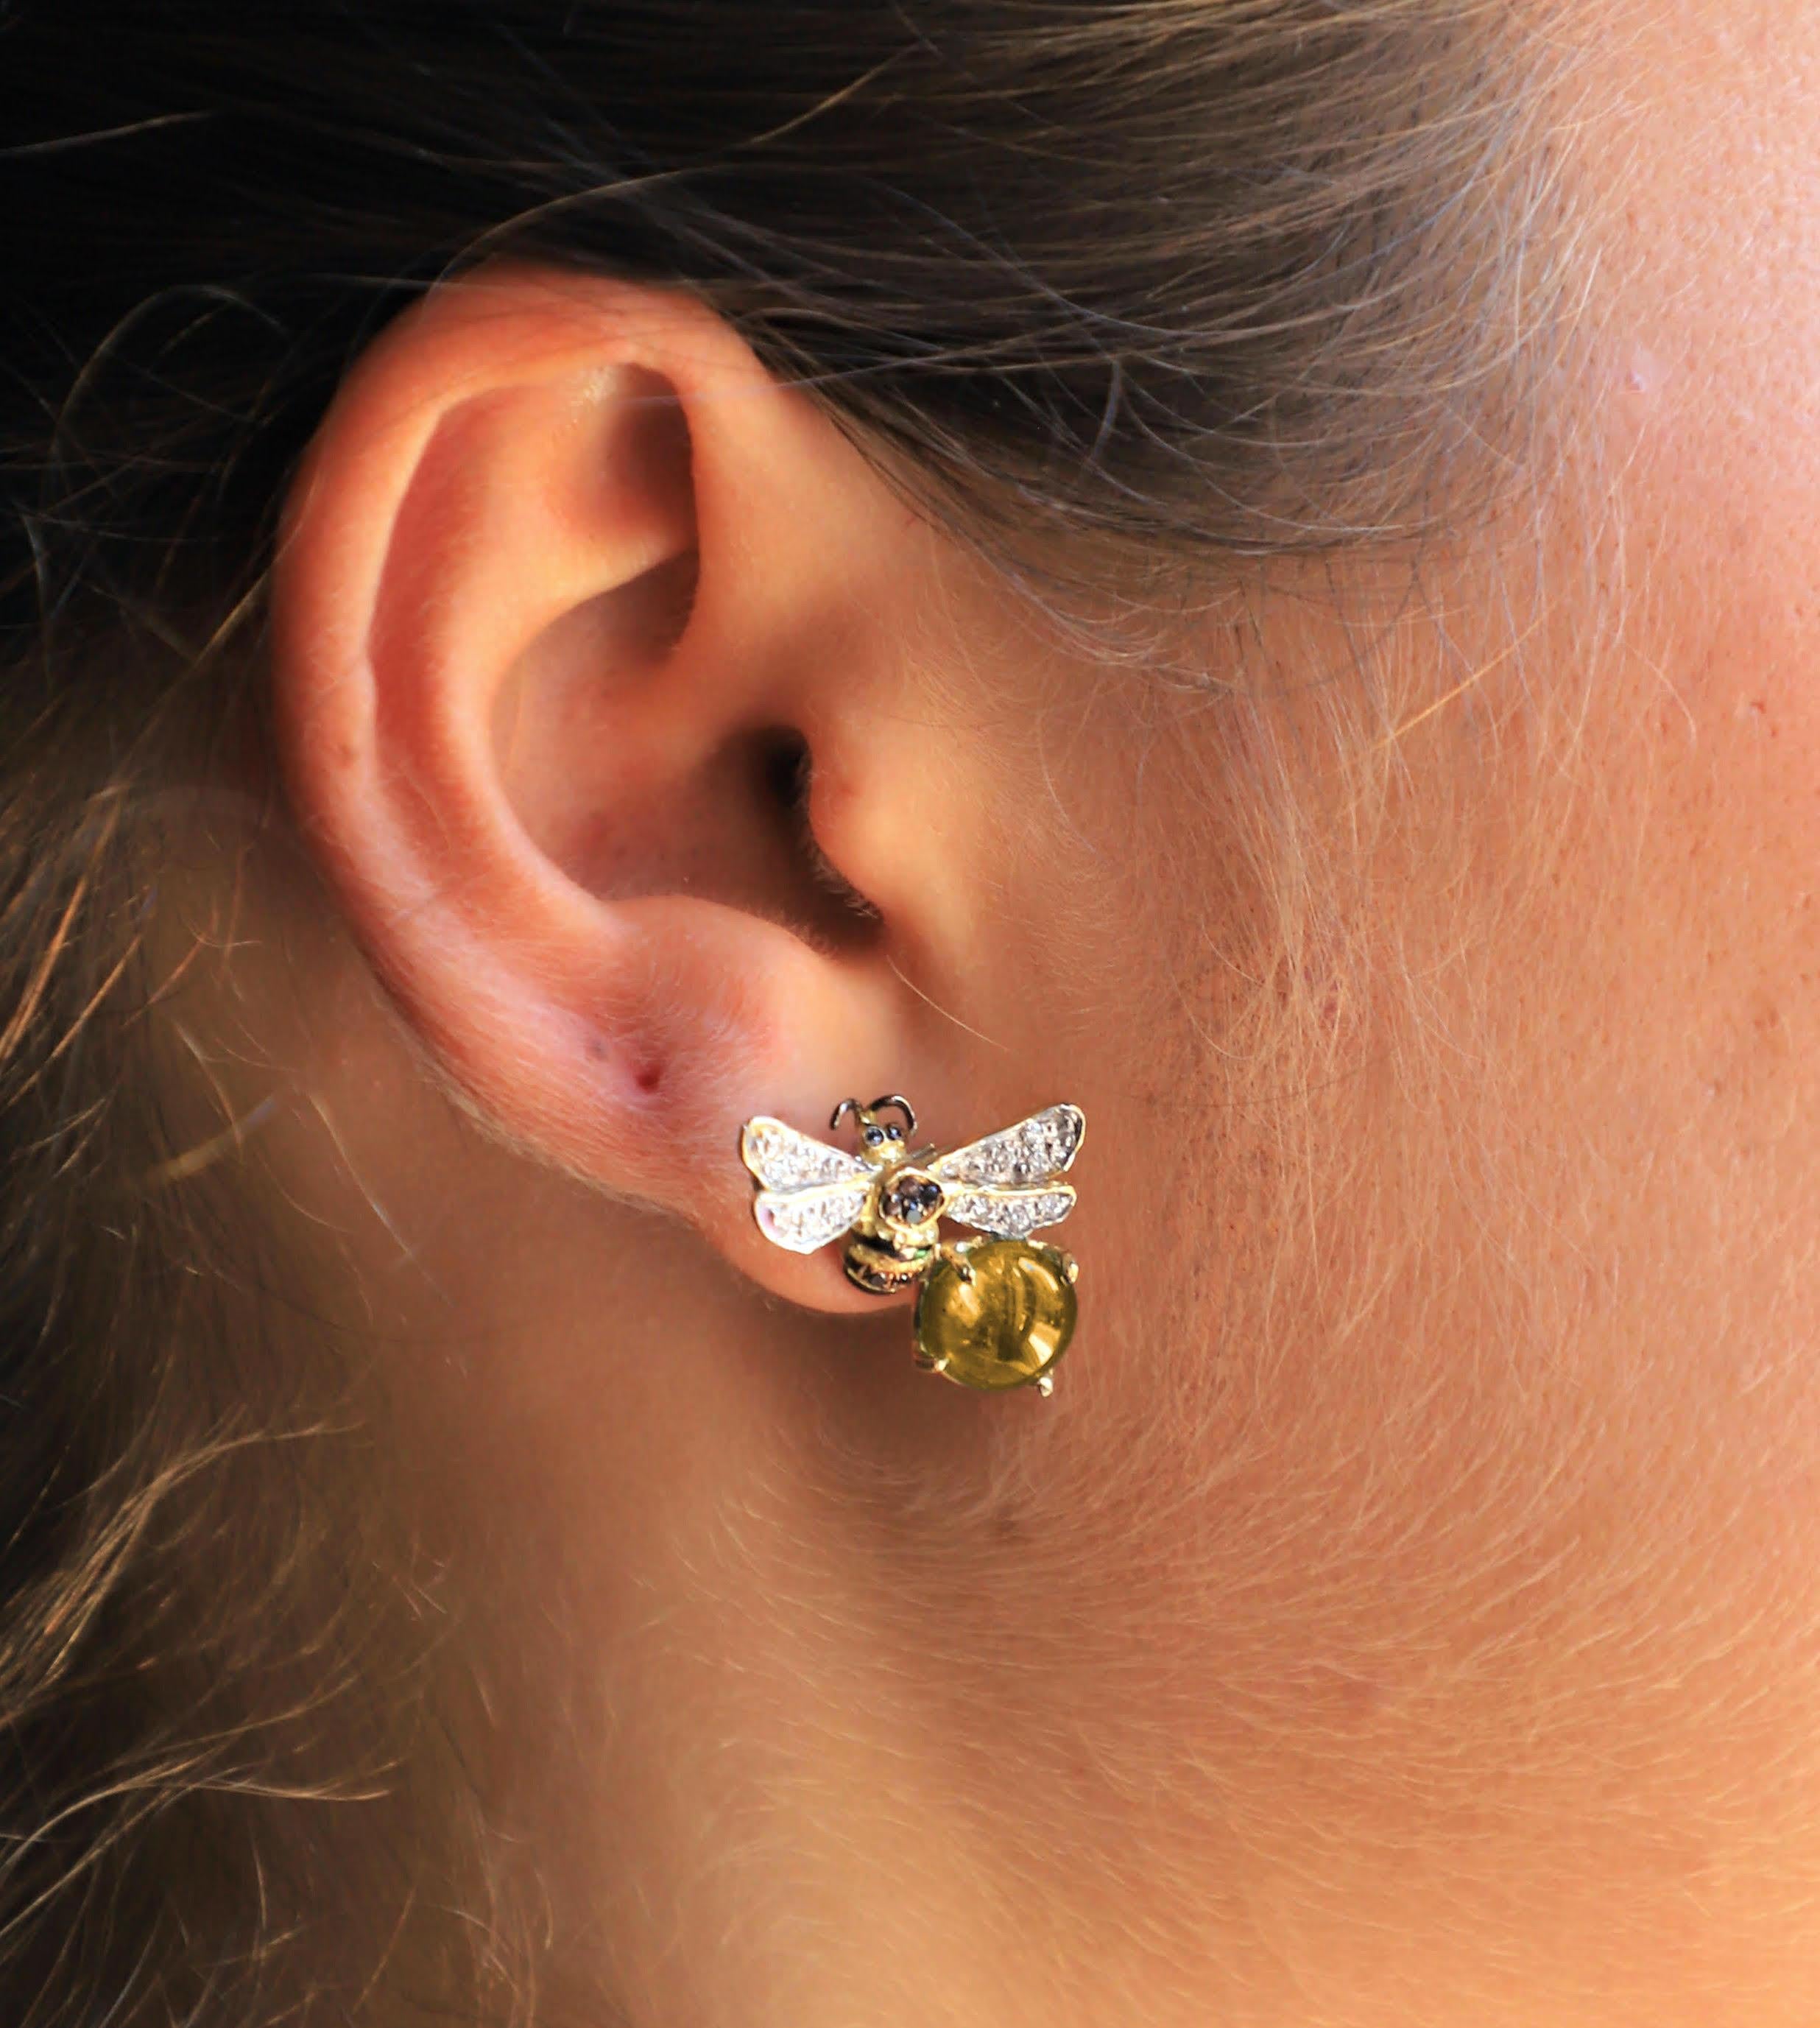 Rossella Ugolini Design Collection a pair of beautiful Bees Stud Earrings handcrafted in 18 Karats Yellow Gold and adorned with a Yellow Citrine and 0.16 Karats White Diamond 0.18 Karats Black Diamonds. The main actor of these earrings is a Bee